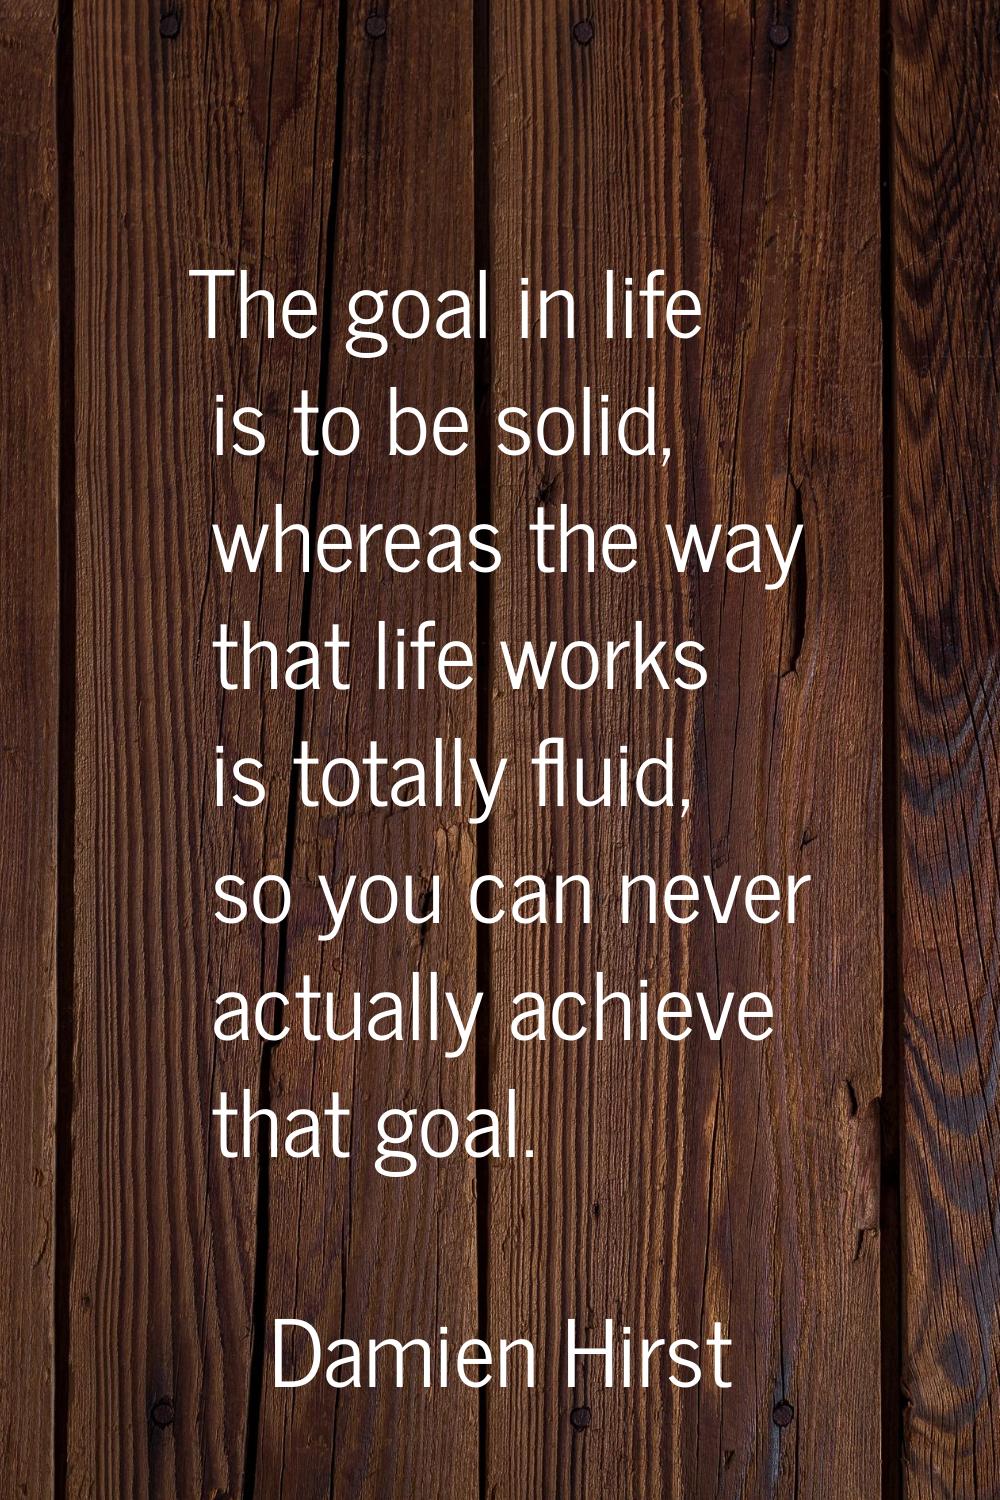 The goal in life is to be solid, whereas the way that life works is totally fluid, so you can never